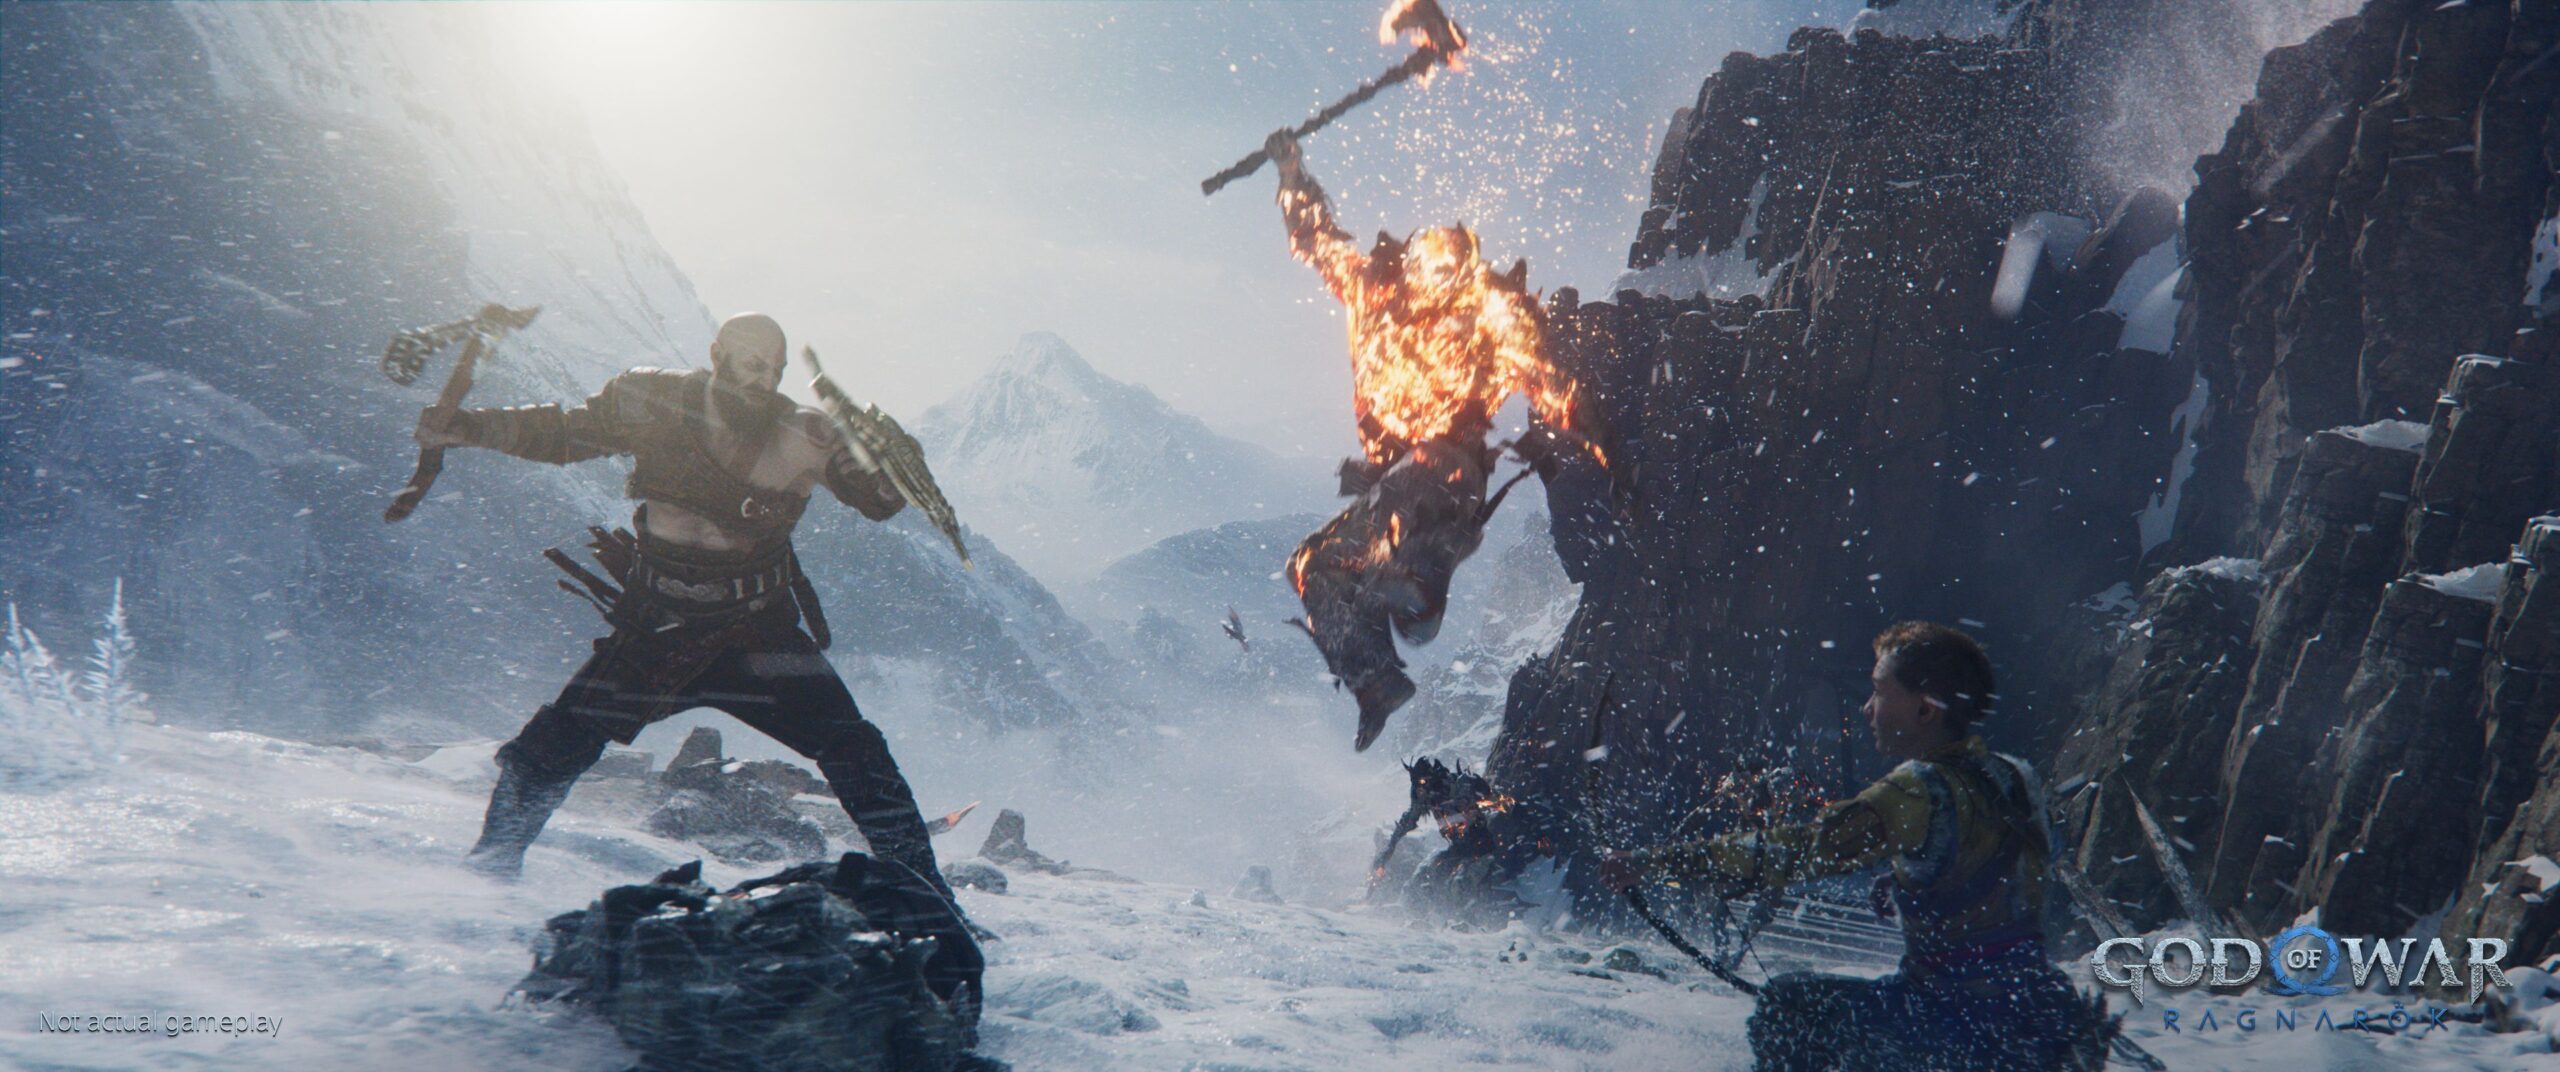 God of War is coming to PC in January 2022 [Official] : r/gaming